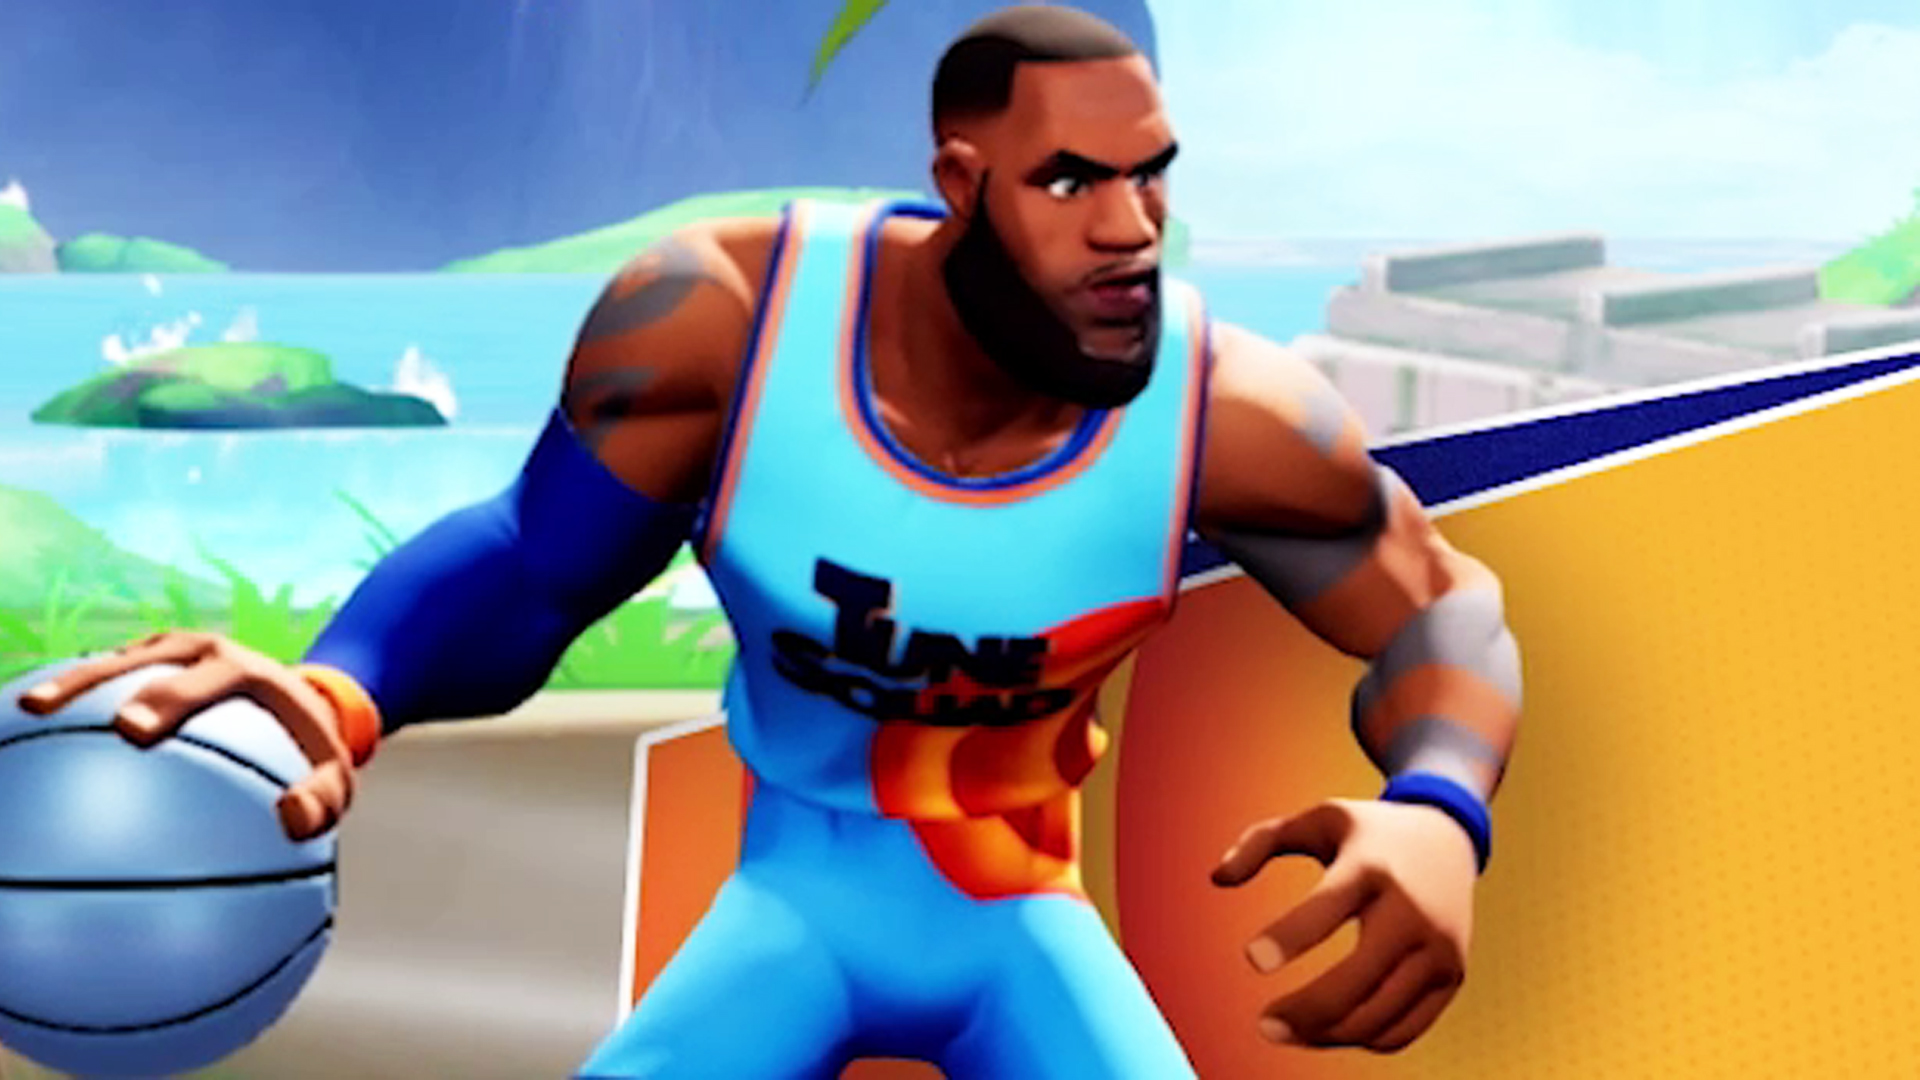 Multiversus patch notes – free release, LeBron James, Taz nerf